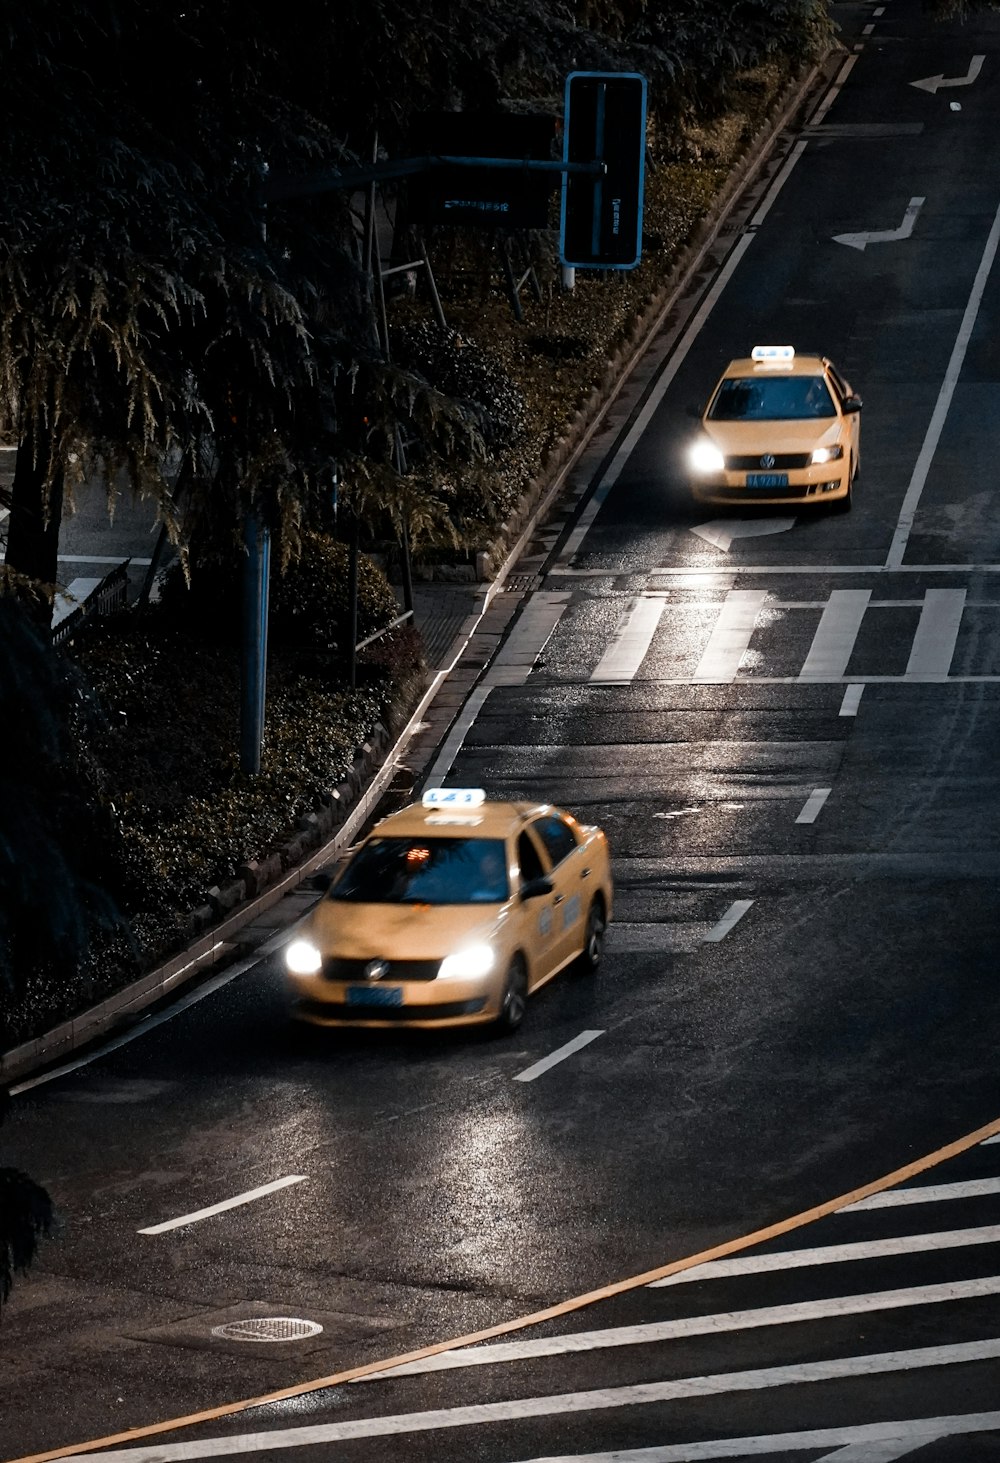 two taxi cabs driving down a street at night